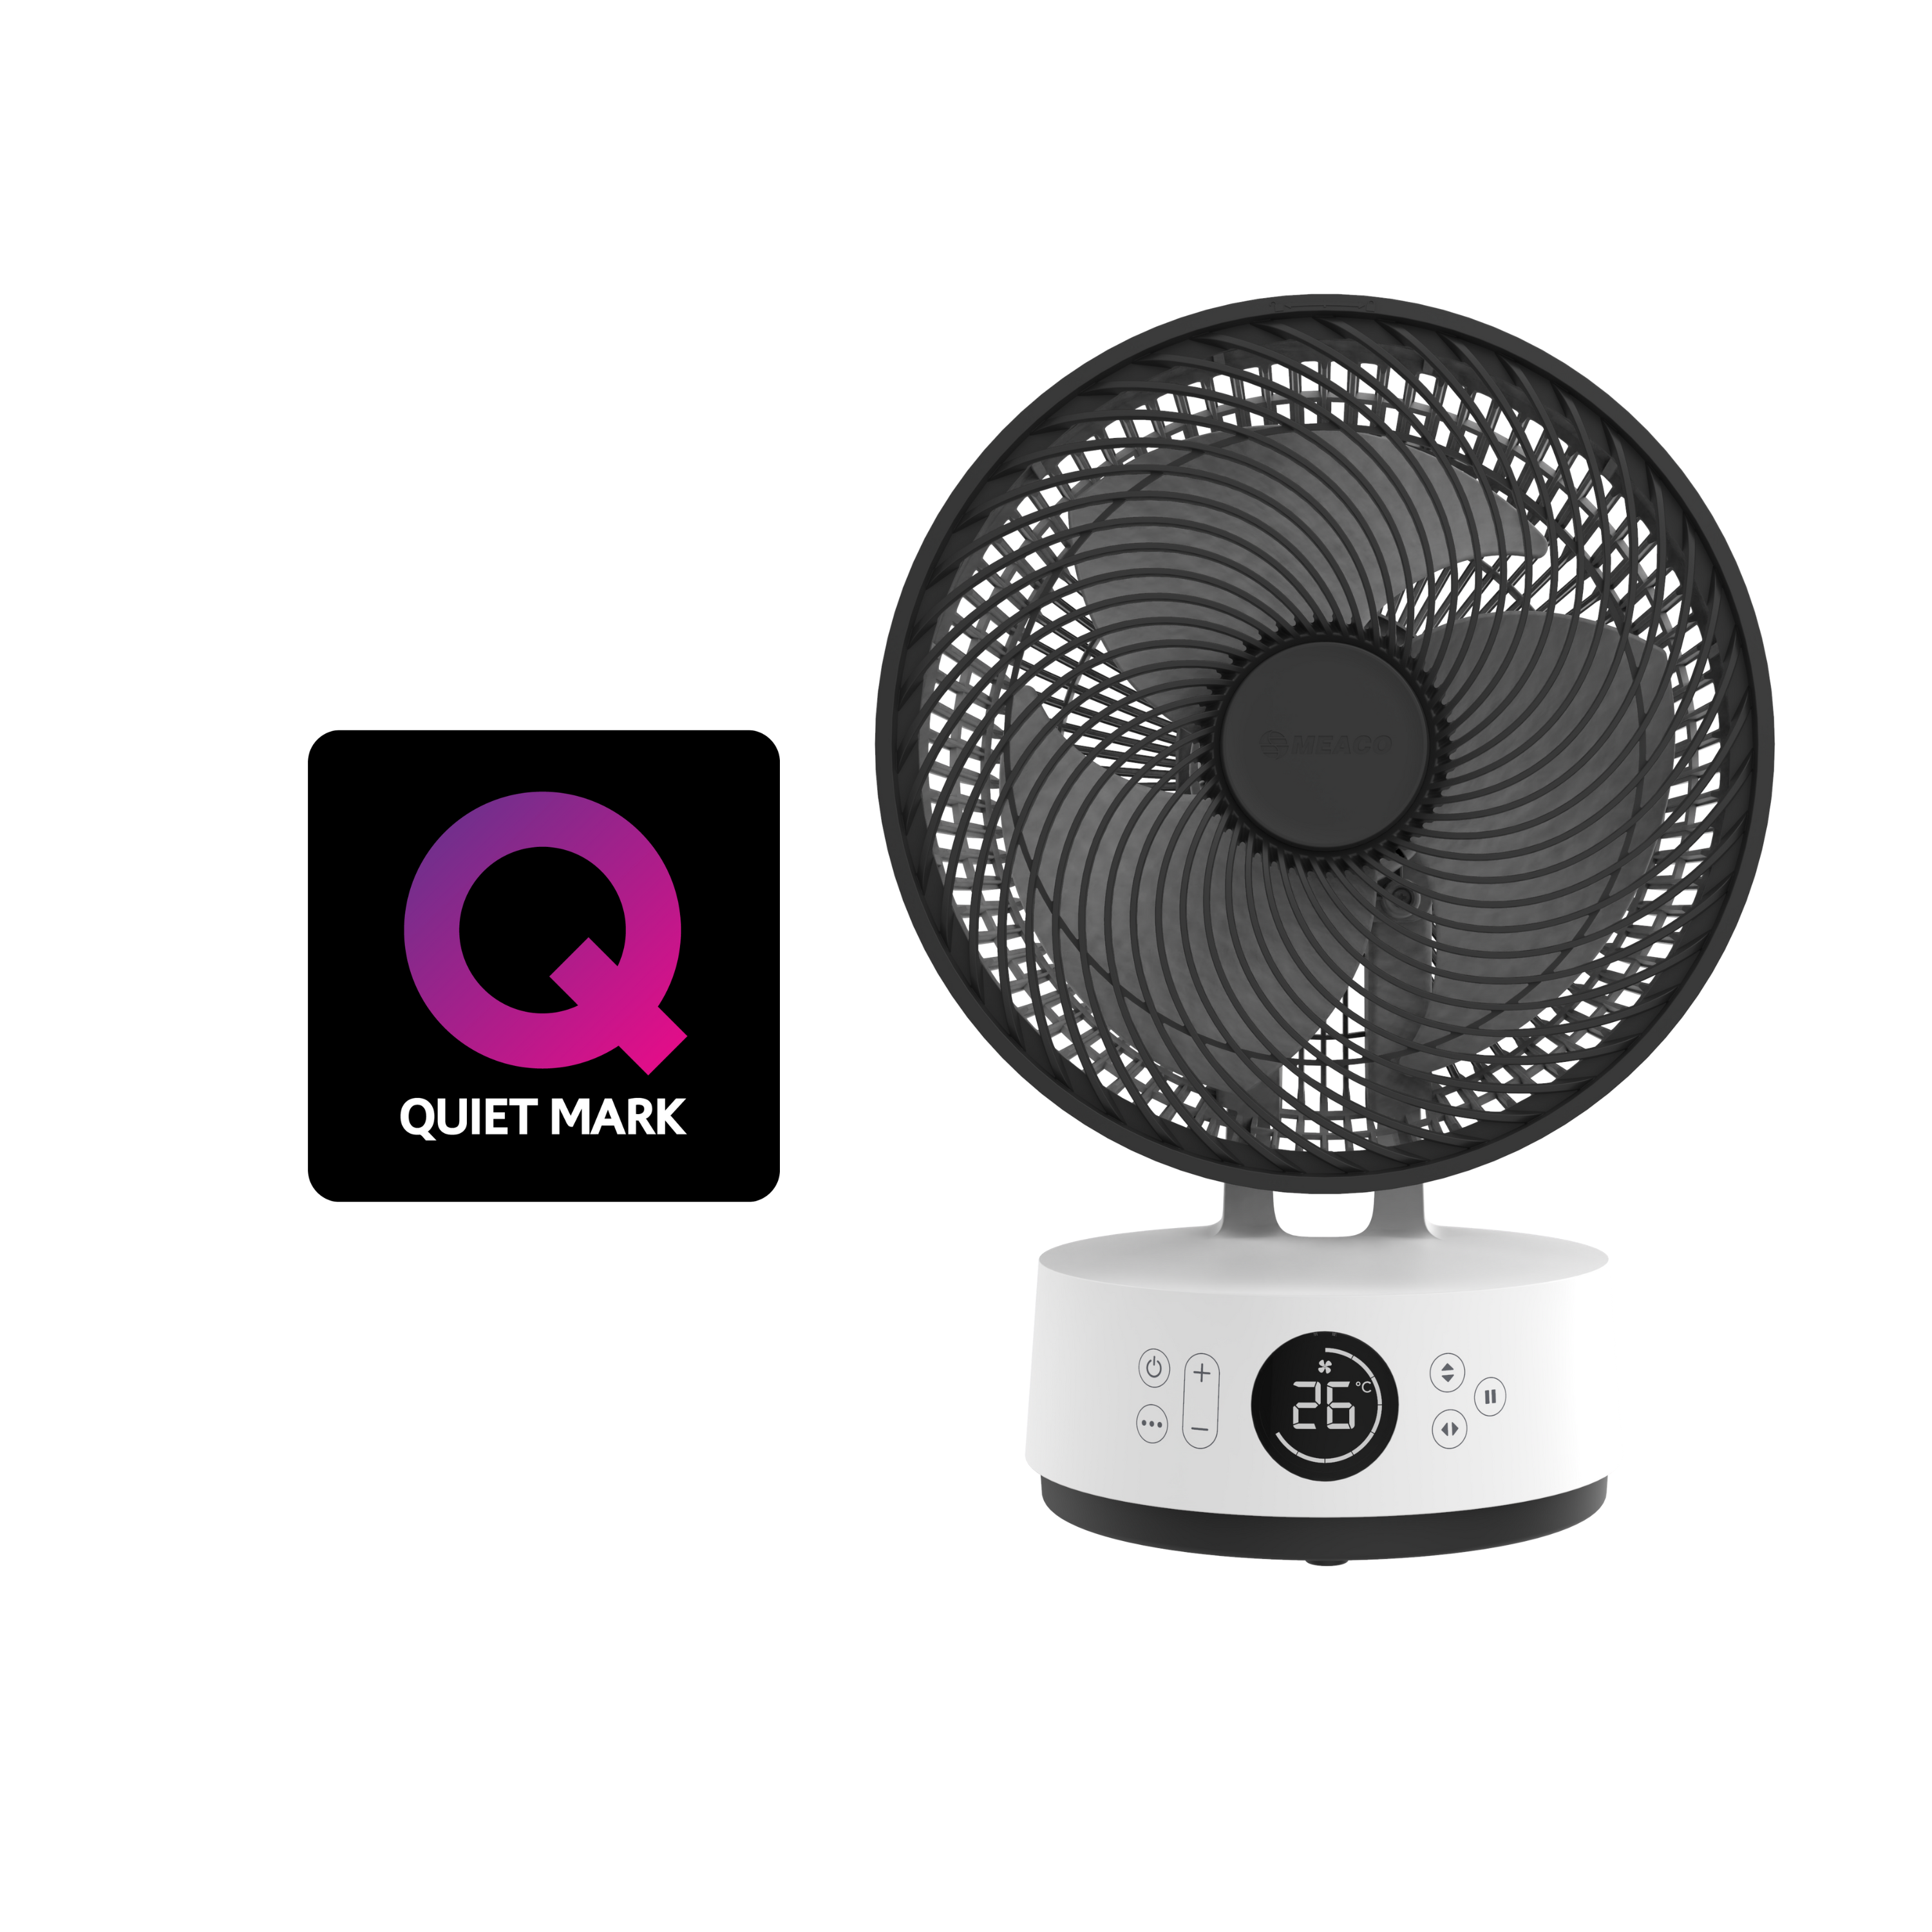 MeacoFan Sefte Table Air Circulator on white background